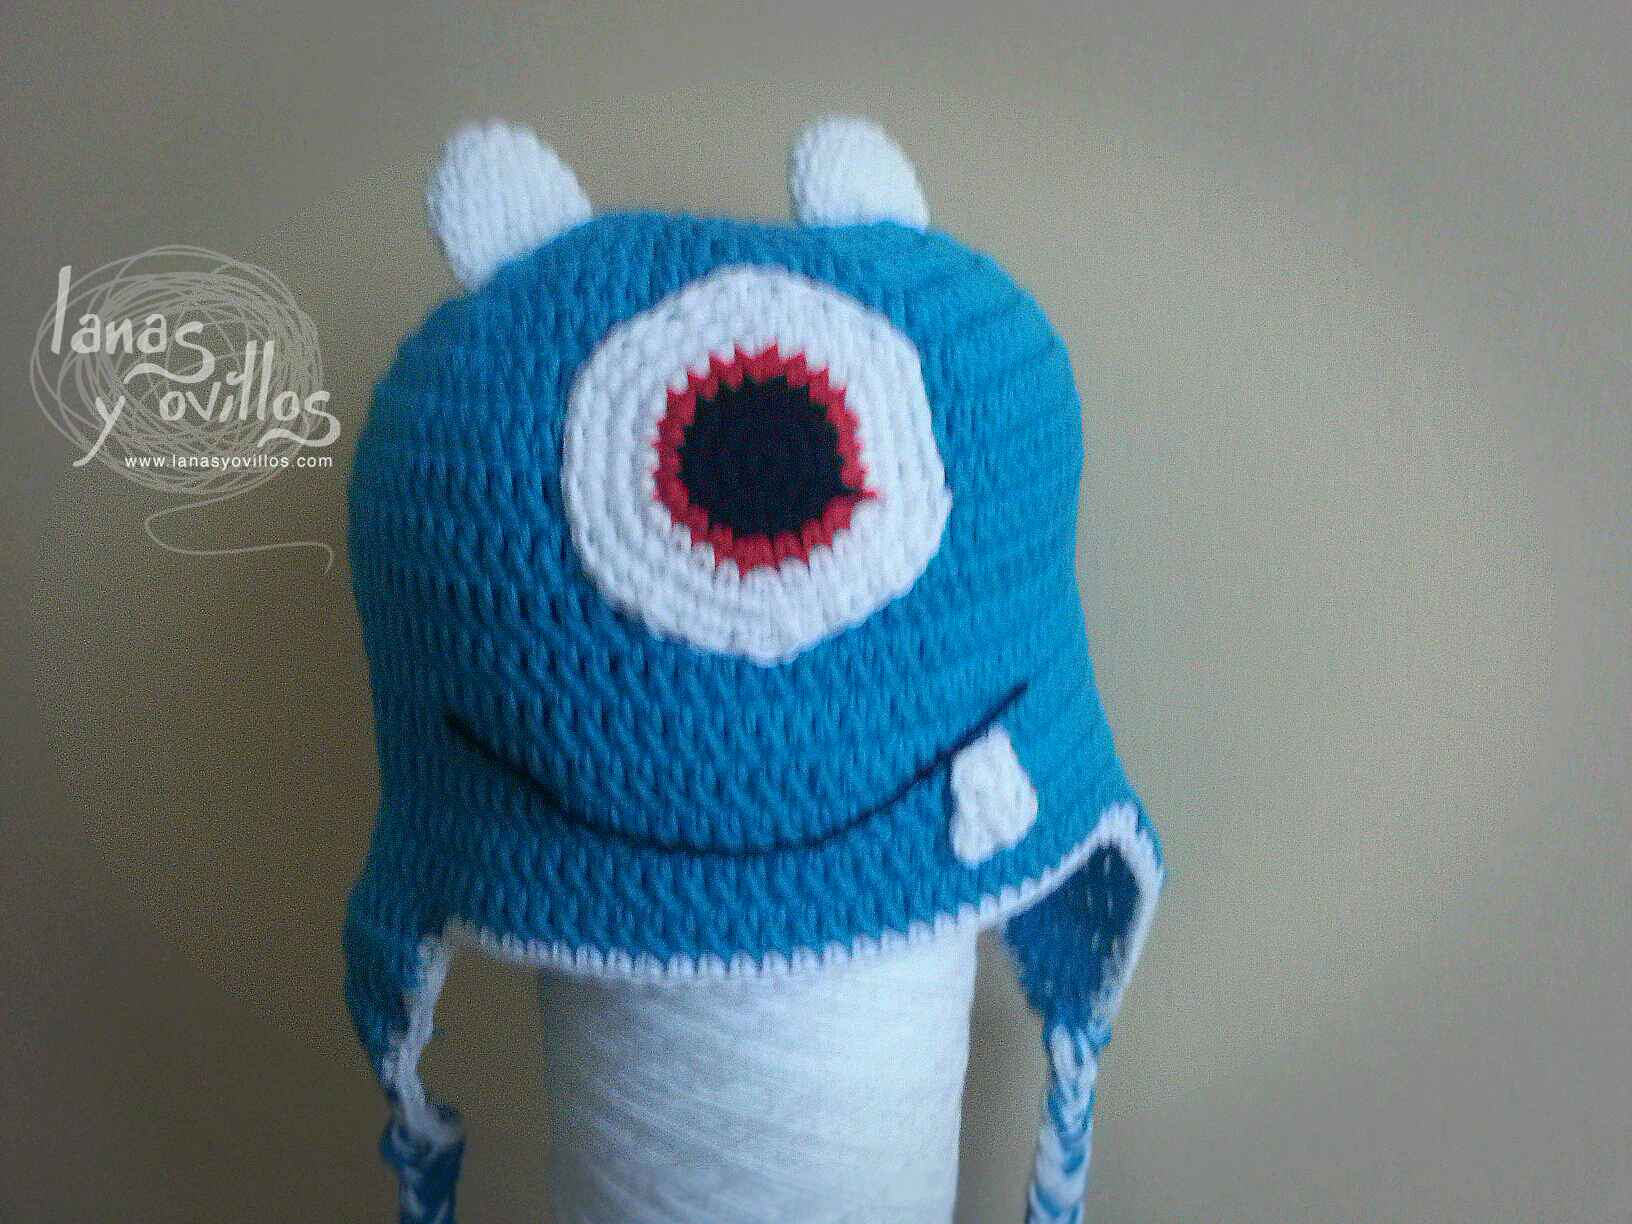 crochet moster hat free pattern with video tutorial